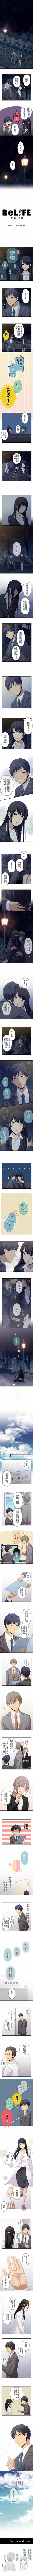 report221. after ReLIFE.jpg